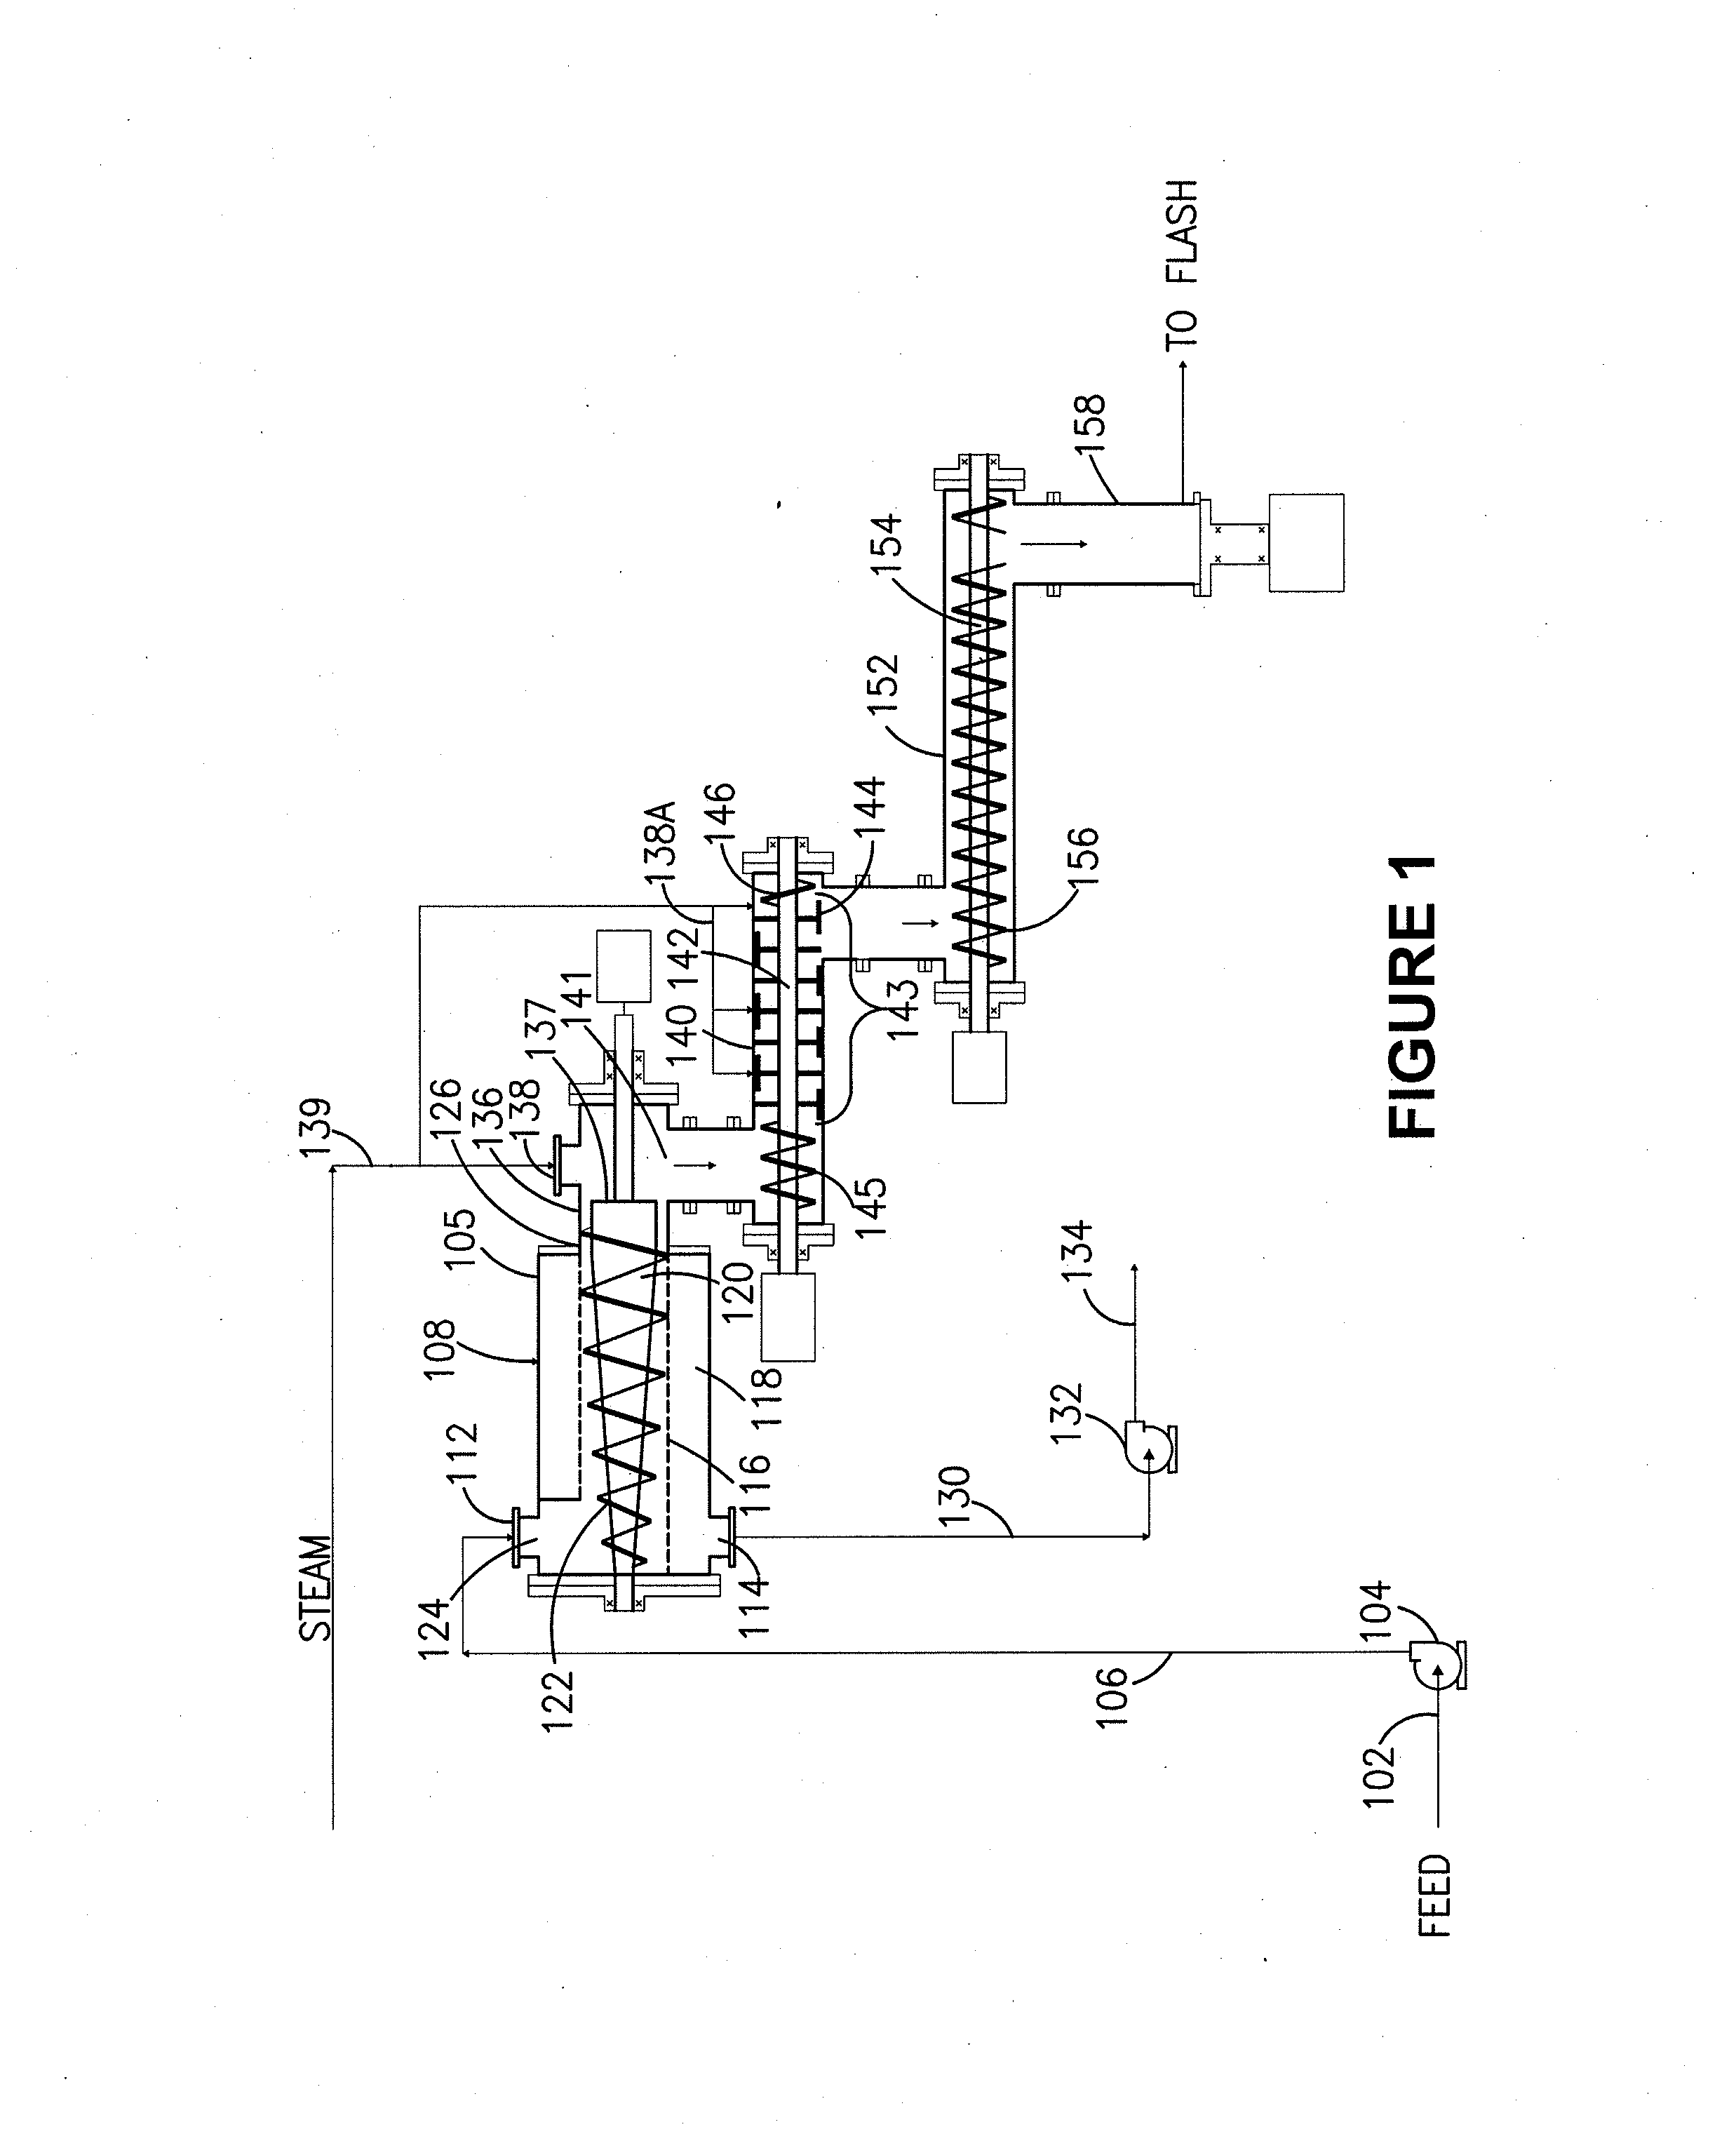 Method for heating a feedstock